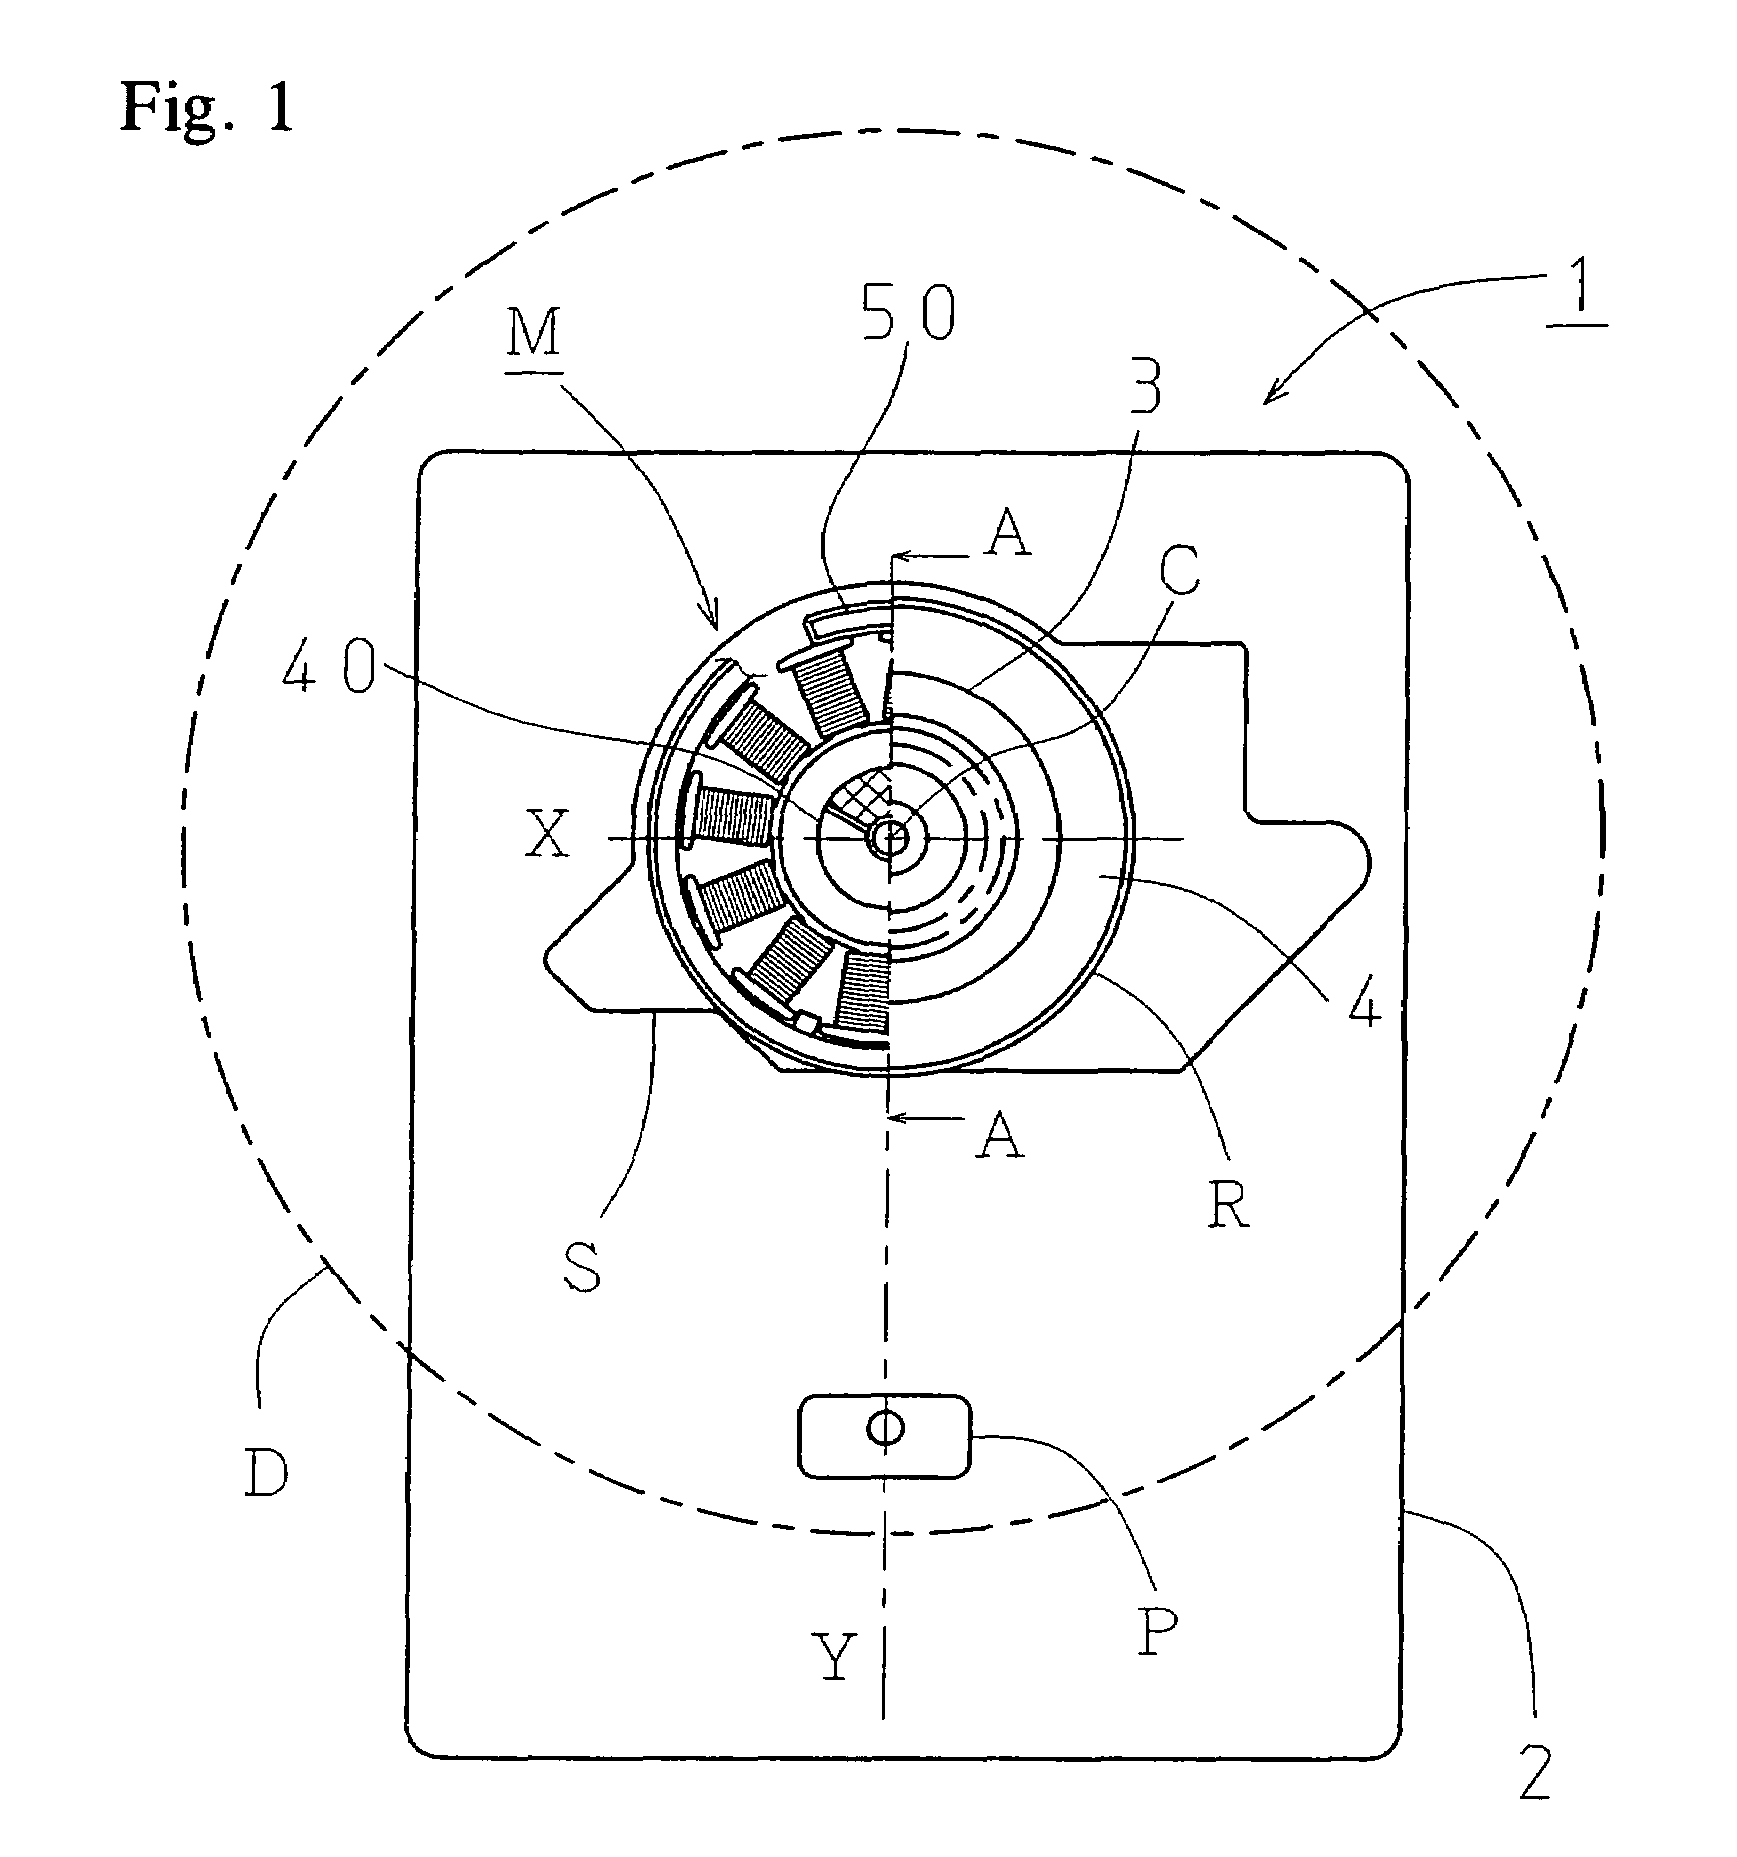 Spindle motor and disk drive unit